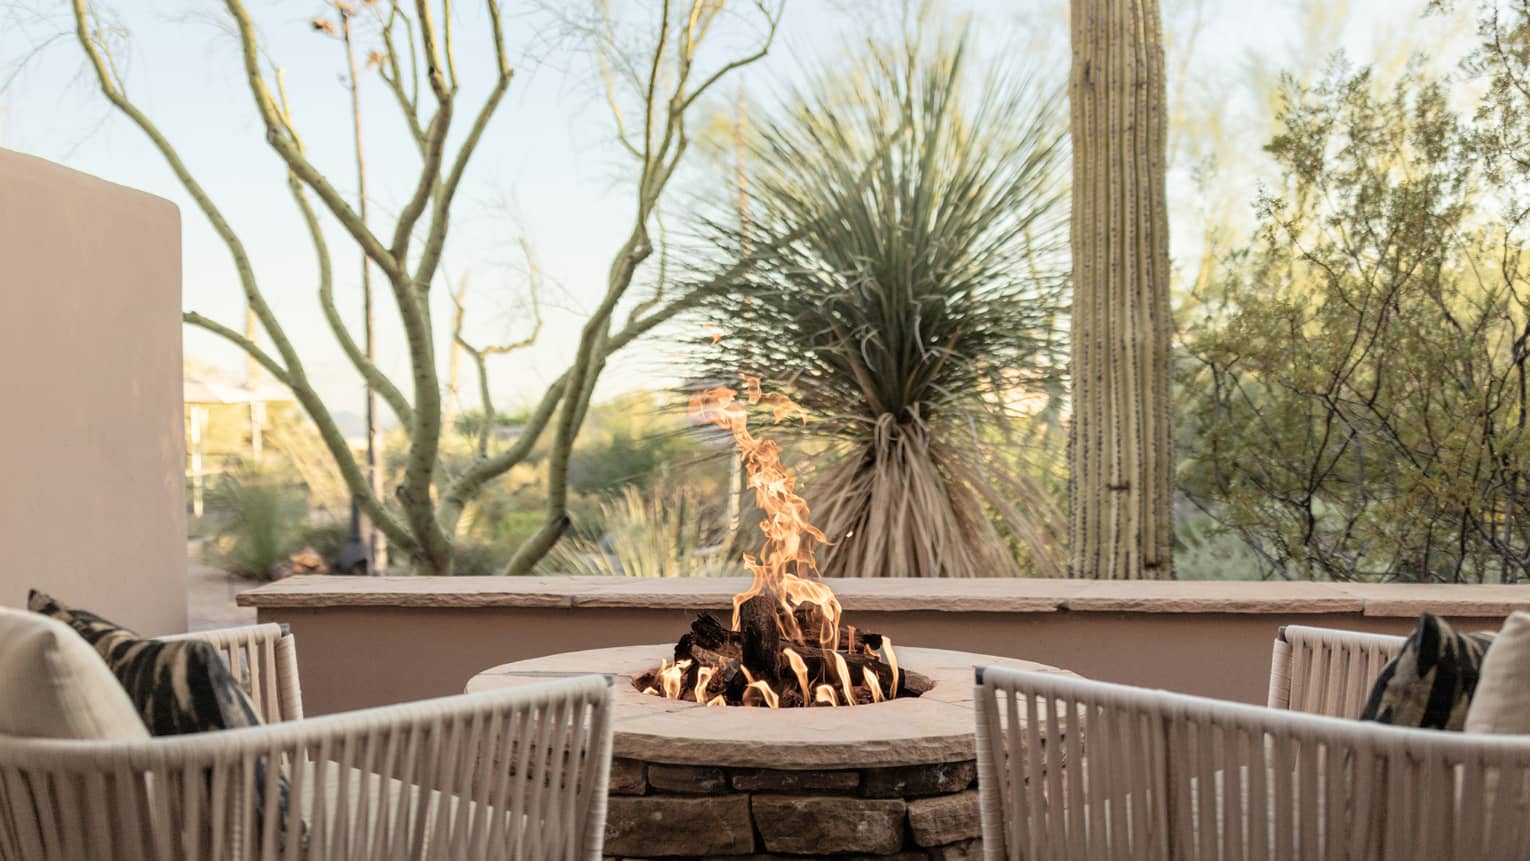 A firepit outside with two chairs.